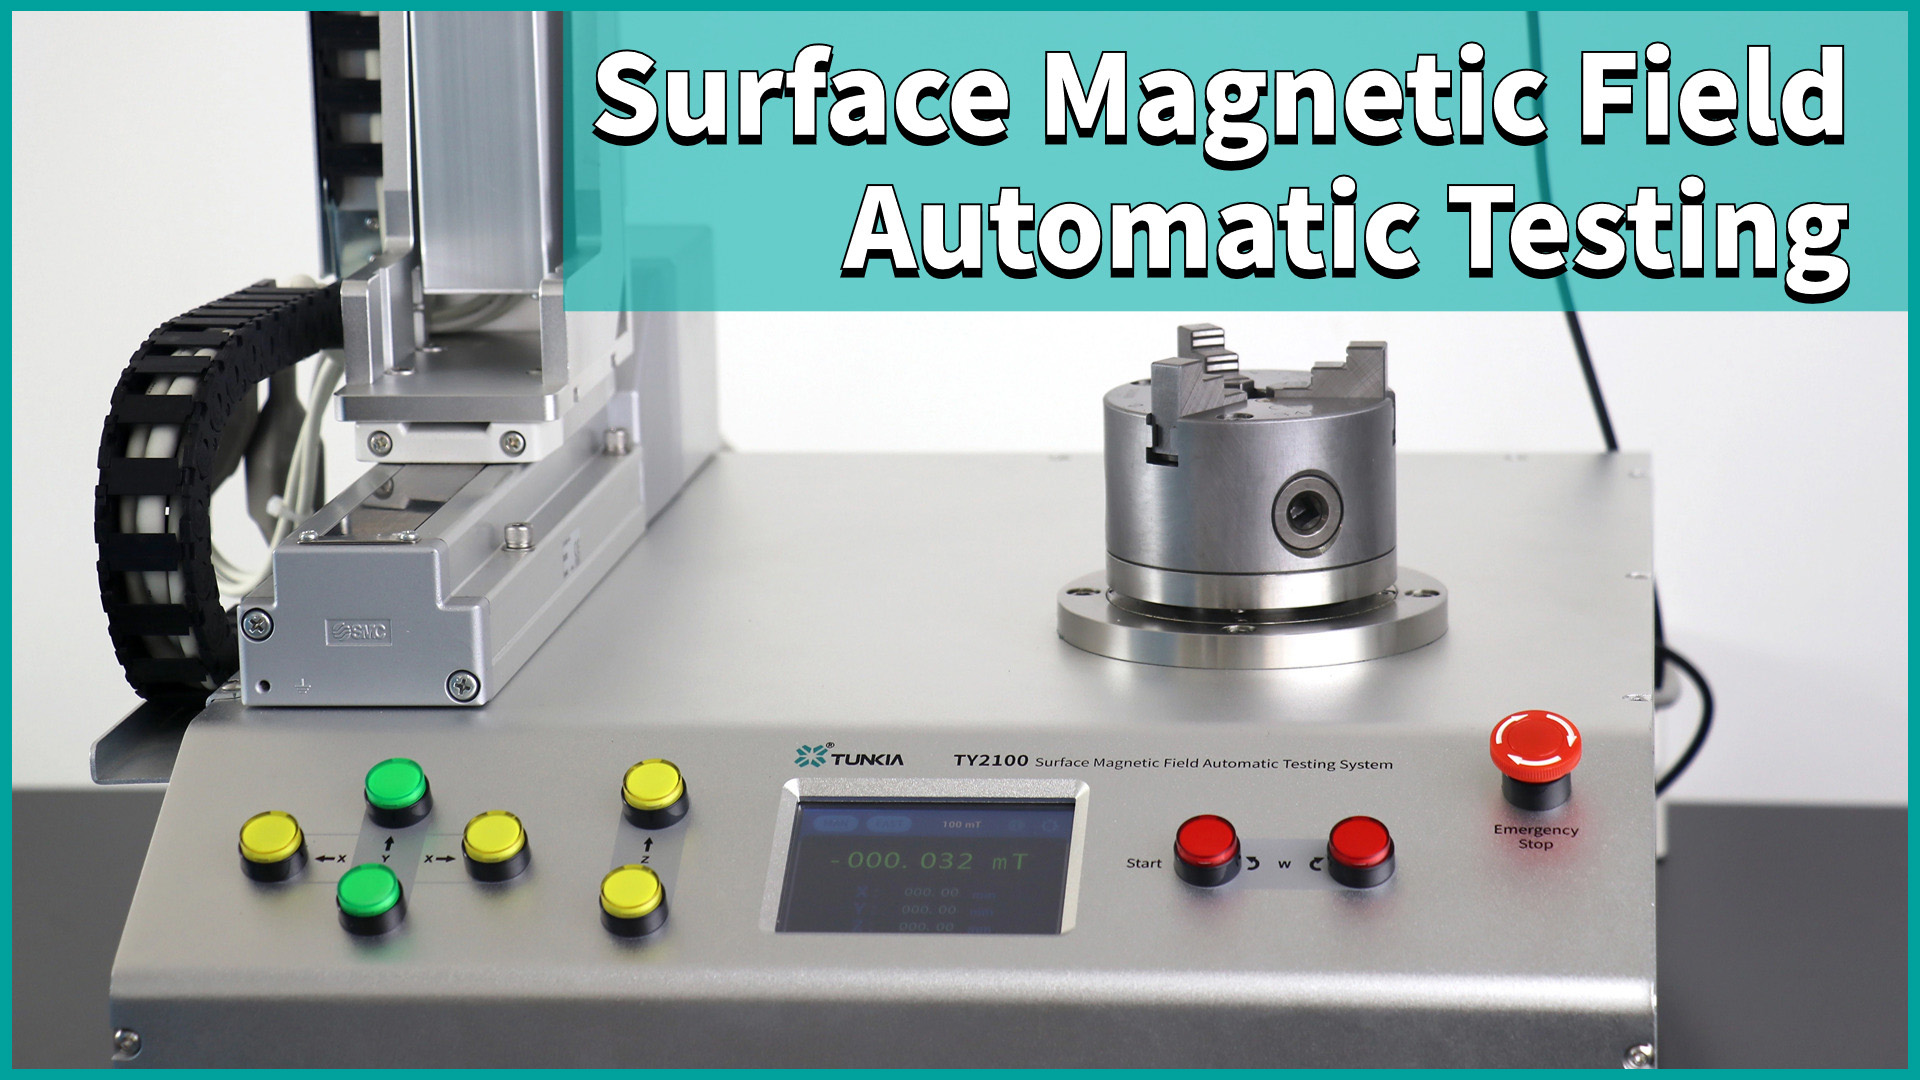 TY2100 Surface Magnetic Field Automatic Testing System